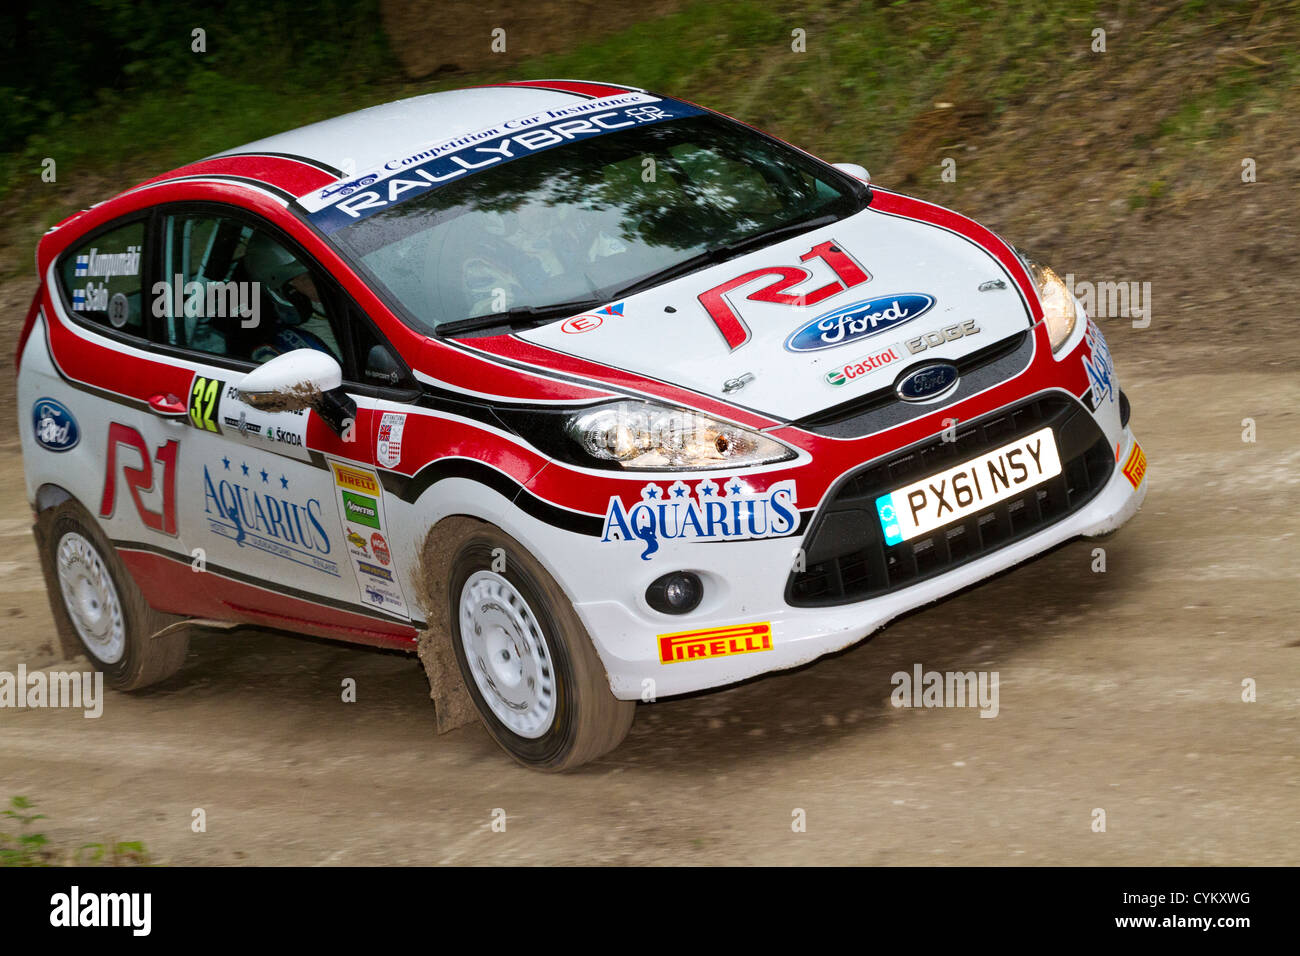 2011 Ford Fiesta R2 With Driver Jussi Kumpumaki On The Rally Stage At